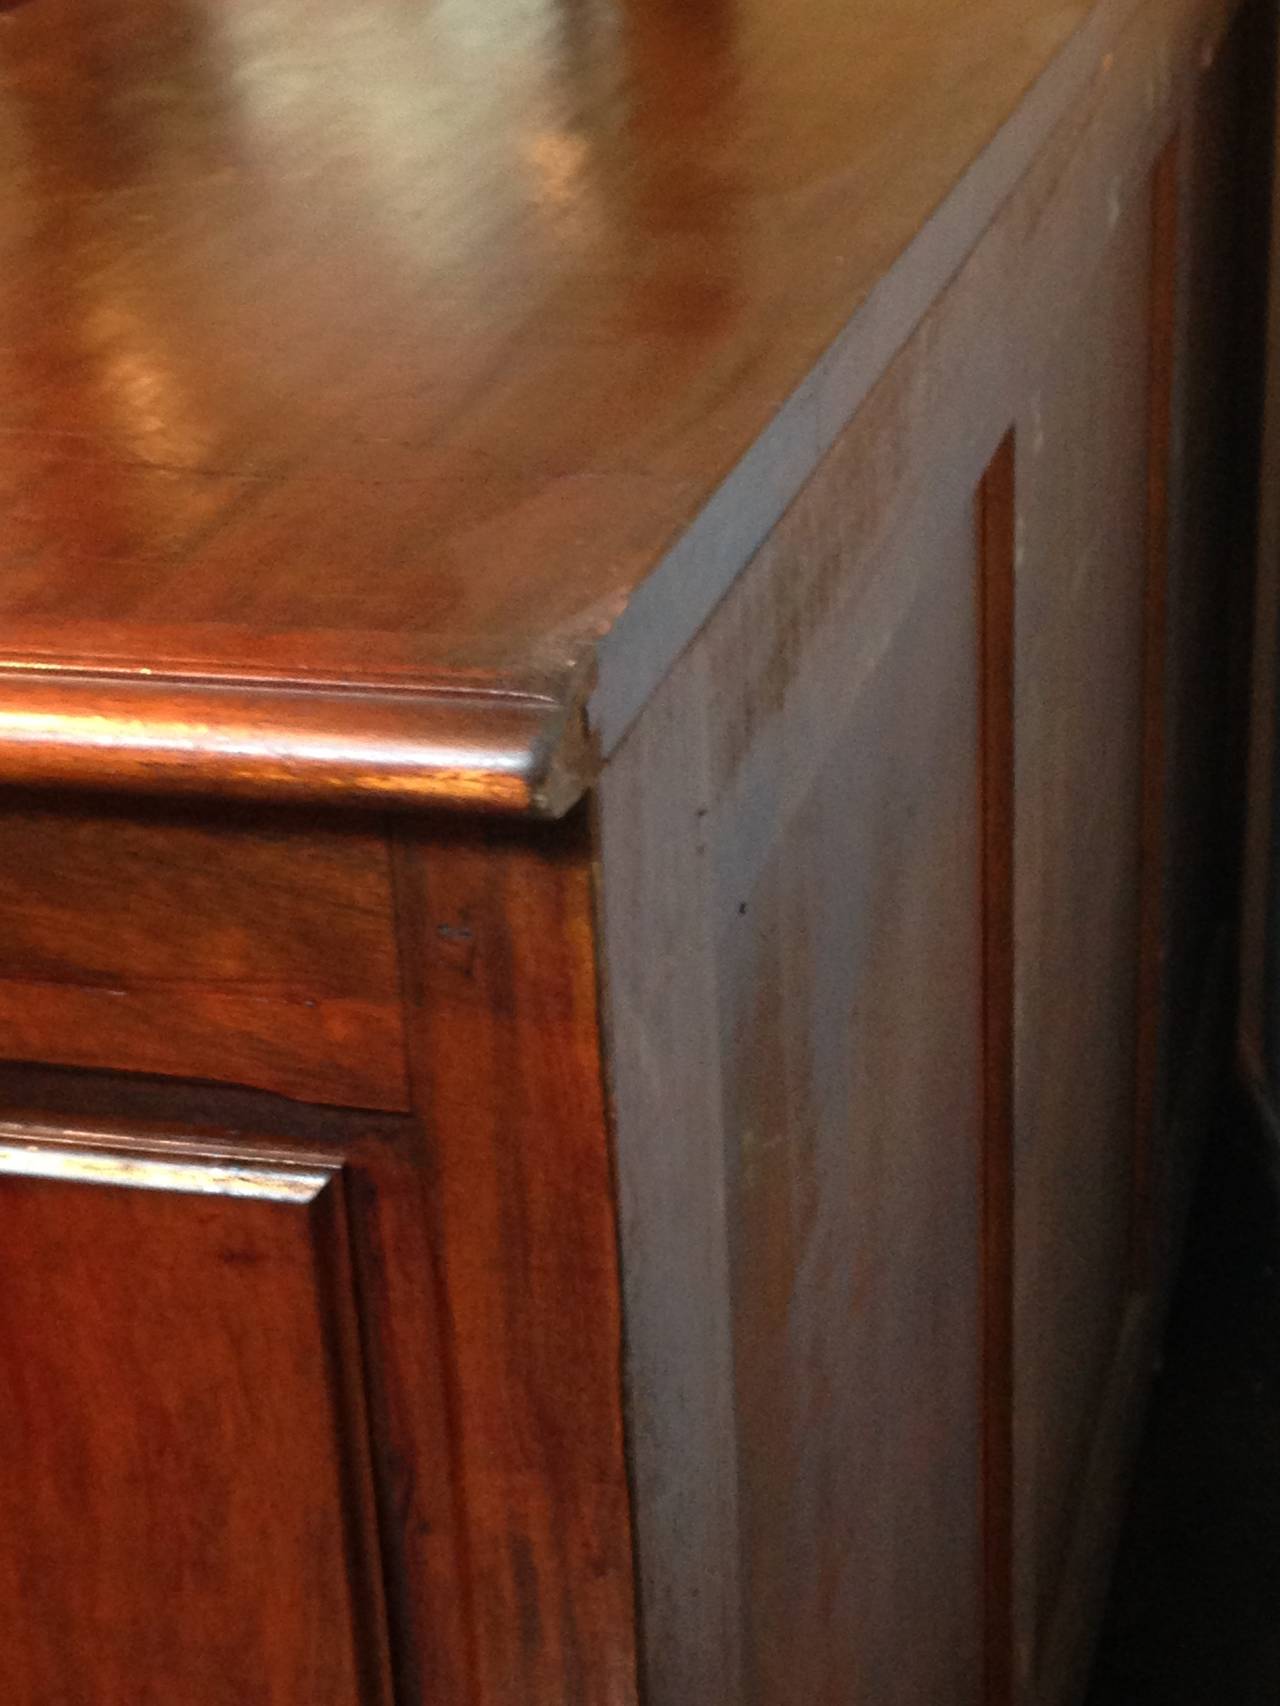 Rectangular top with molded edge over three drawers above three paneled doors.